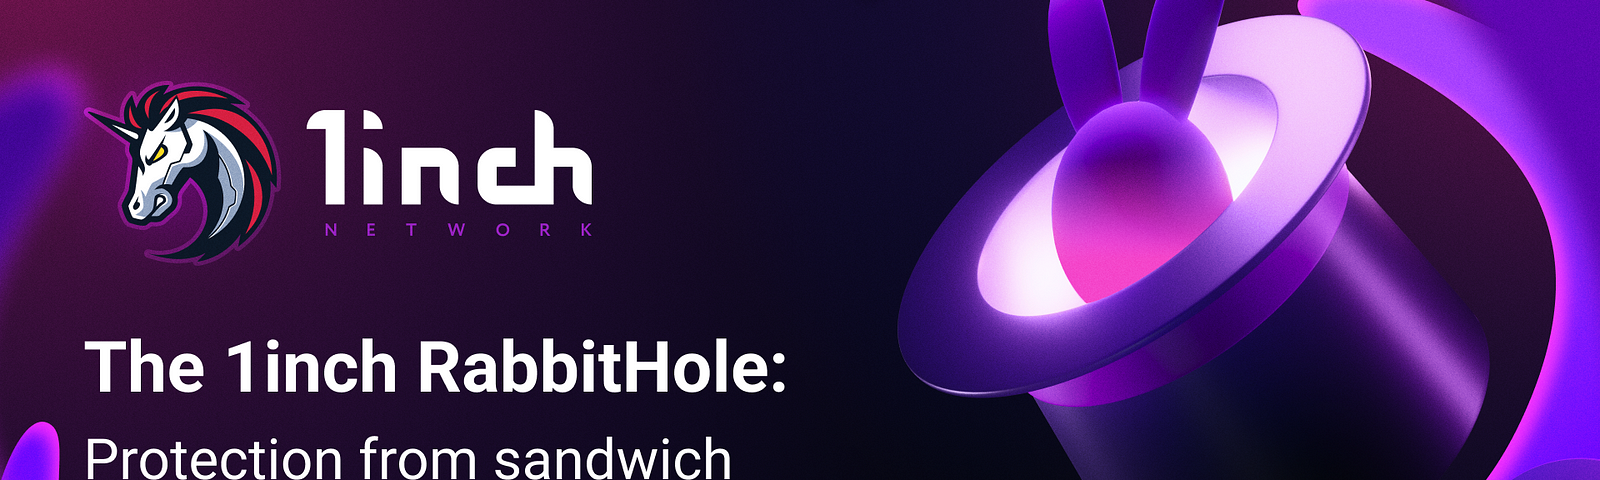 The 1inch RabbitHole: protection from sandwich attacks